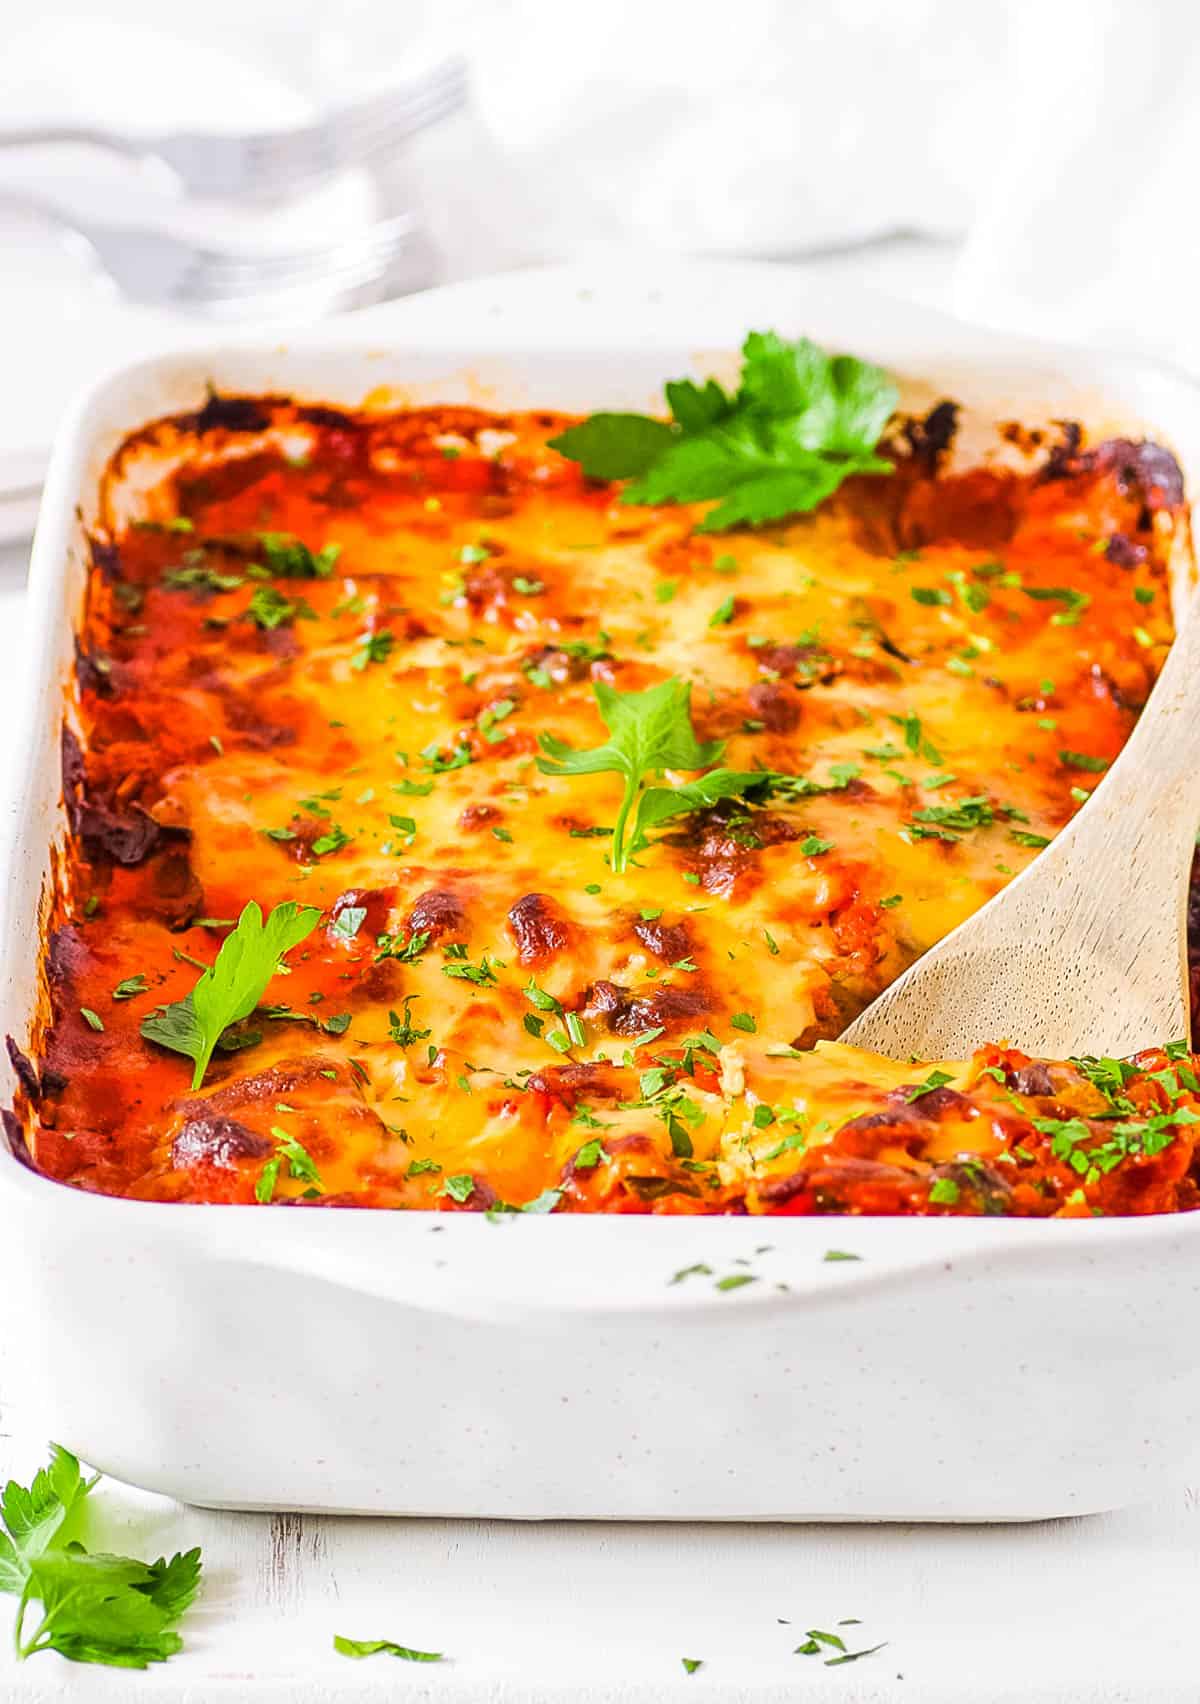 Healthy baked spaghetti squash casserole, in a casserole dish topped with fresh herbs.